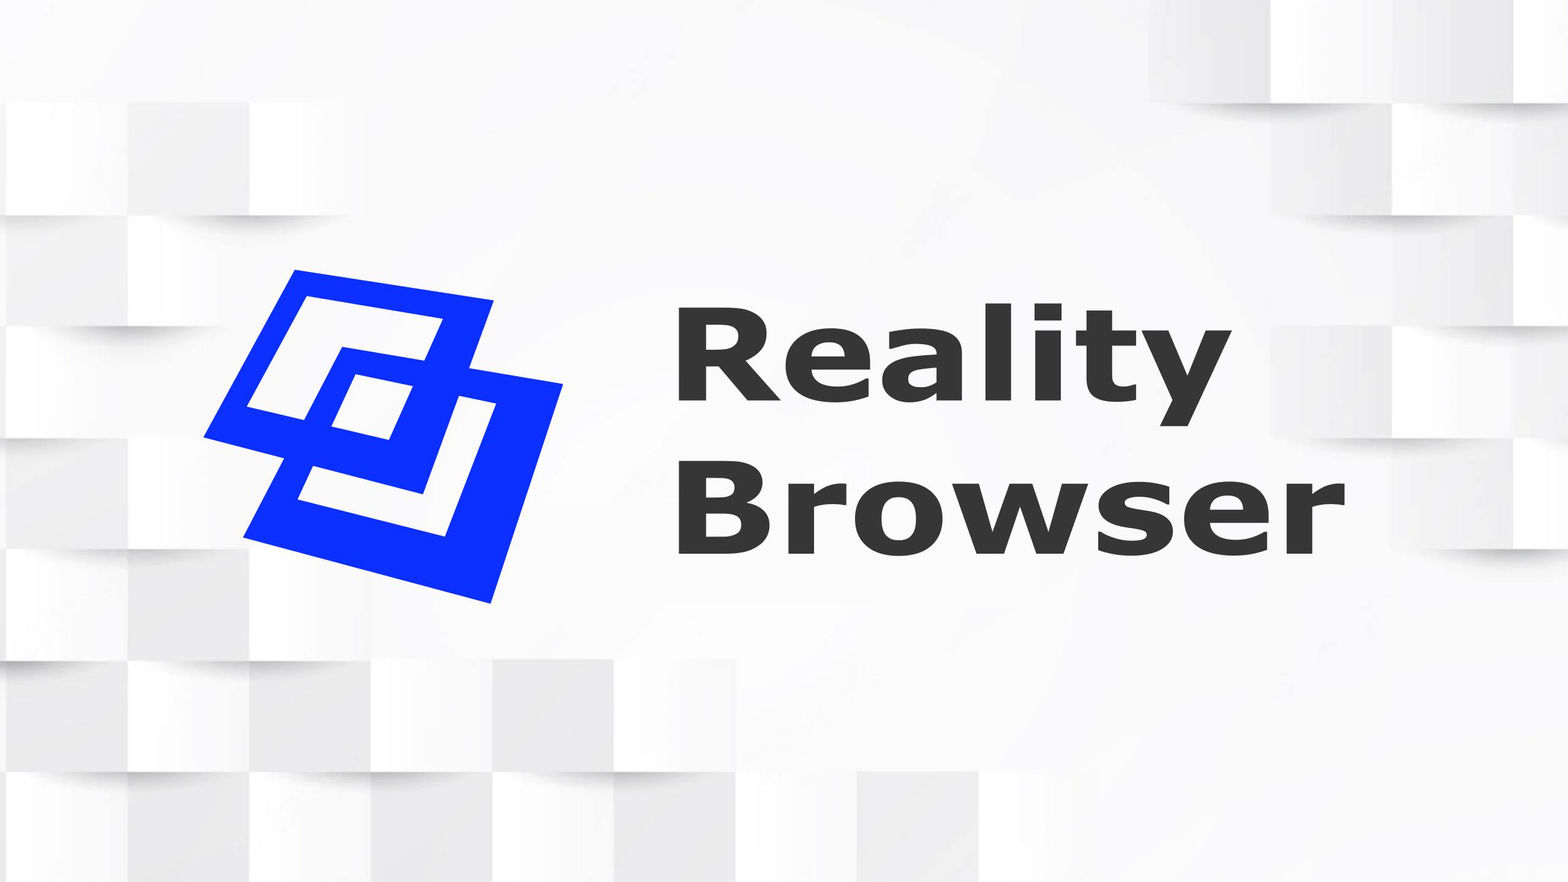 Reality Browser